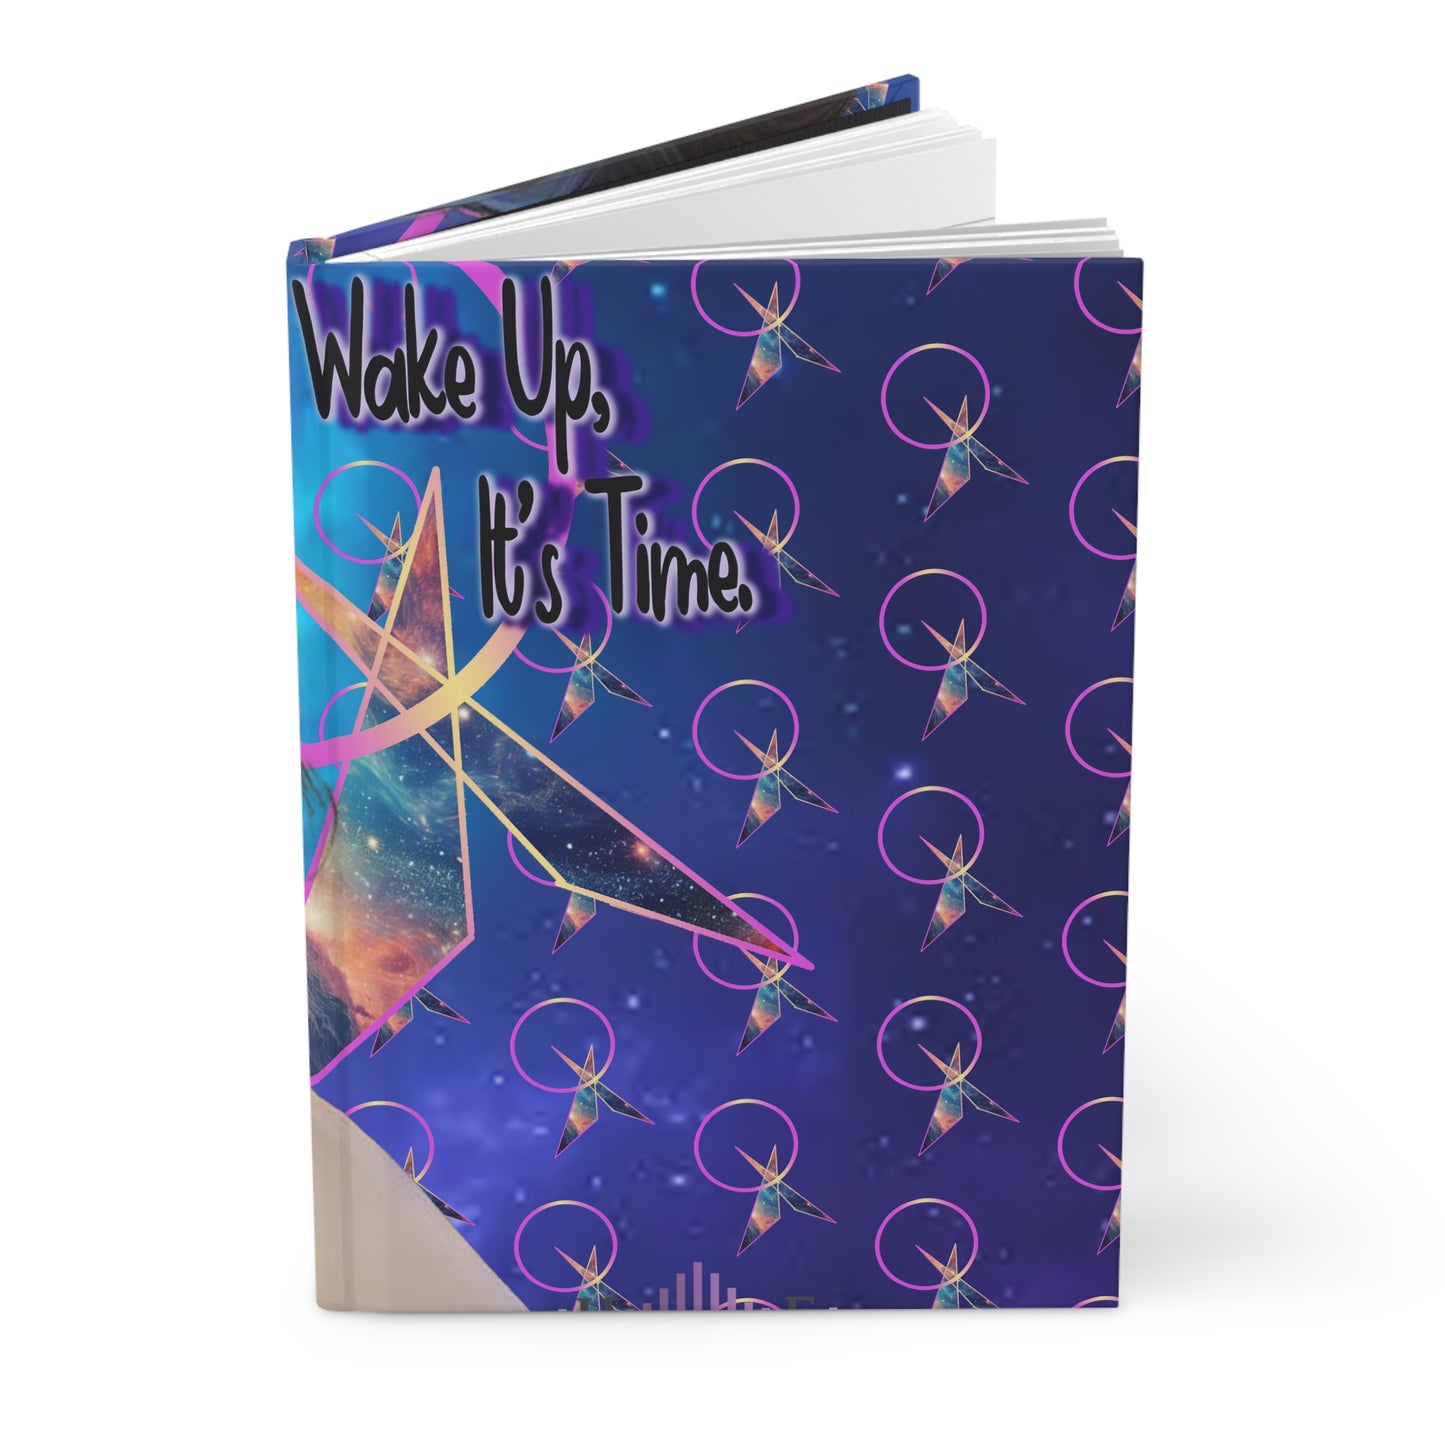 Wake Up, It's time - Hardcover Journal Matte